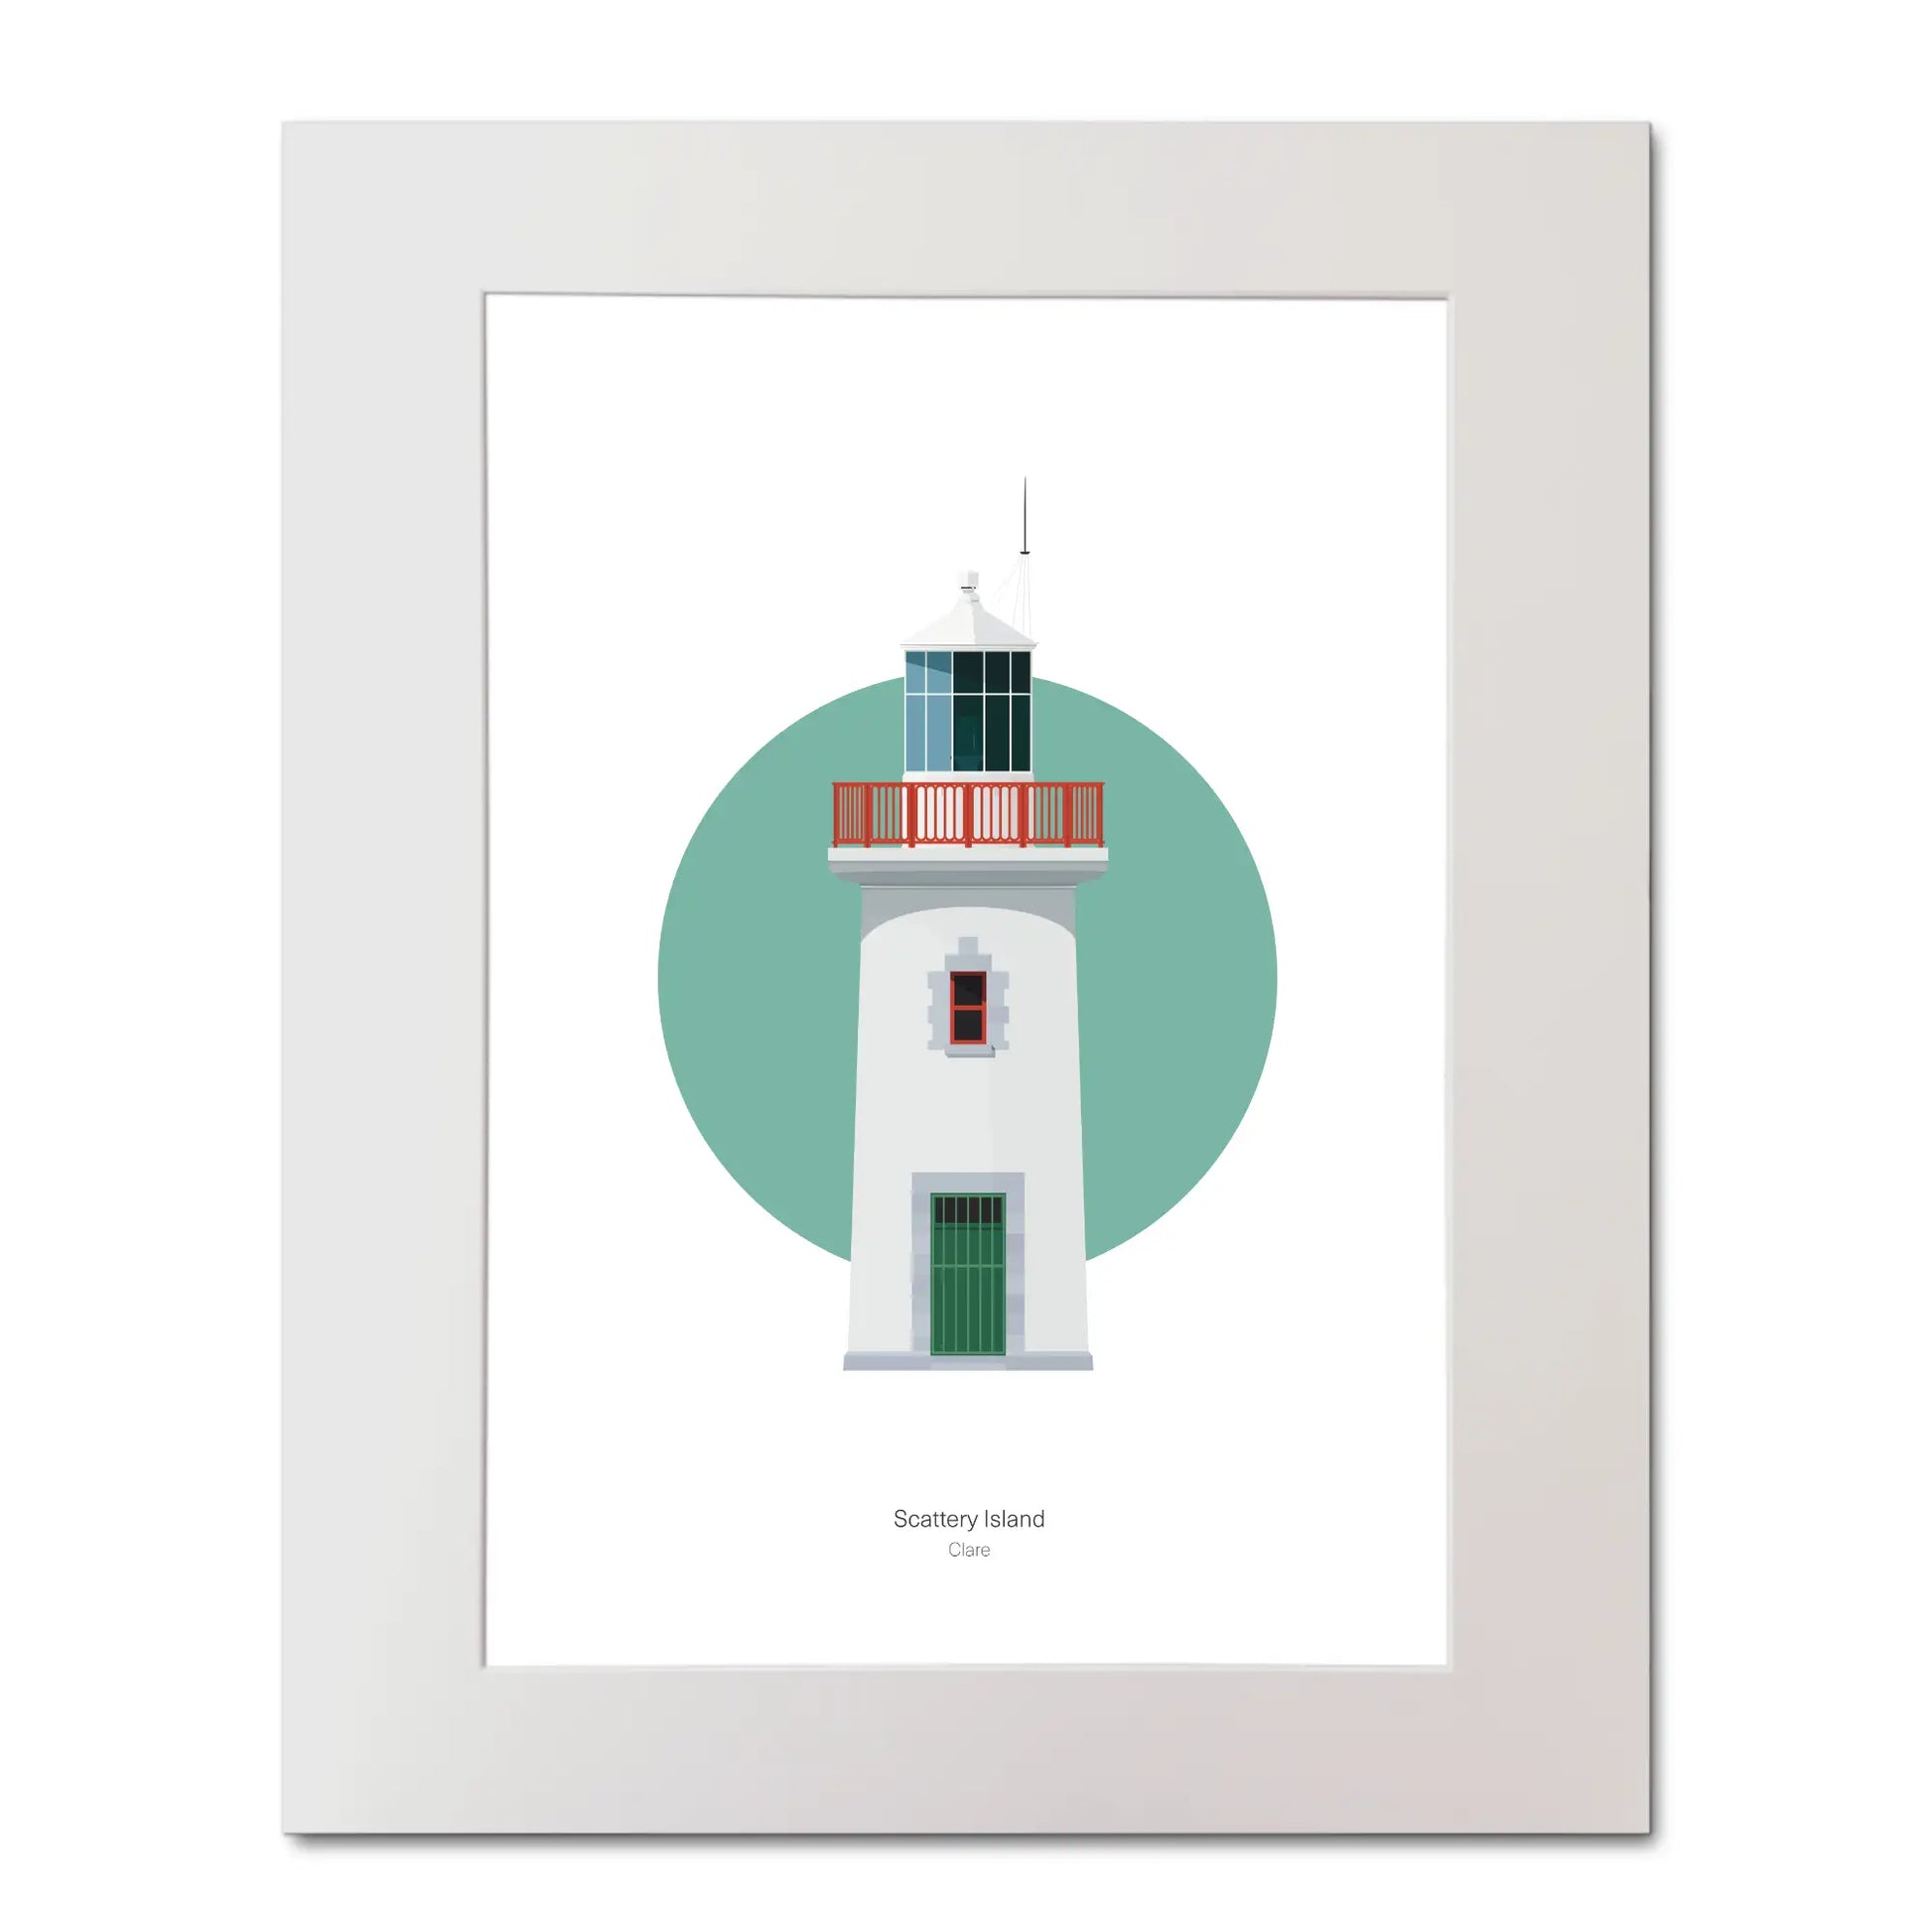 Contemporary illustration of Scattery Island lighthouse on a white background inside light blue square, mounted and measuring 40x50cm.